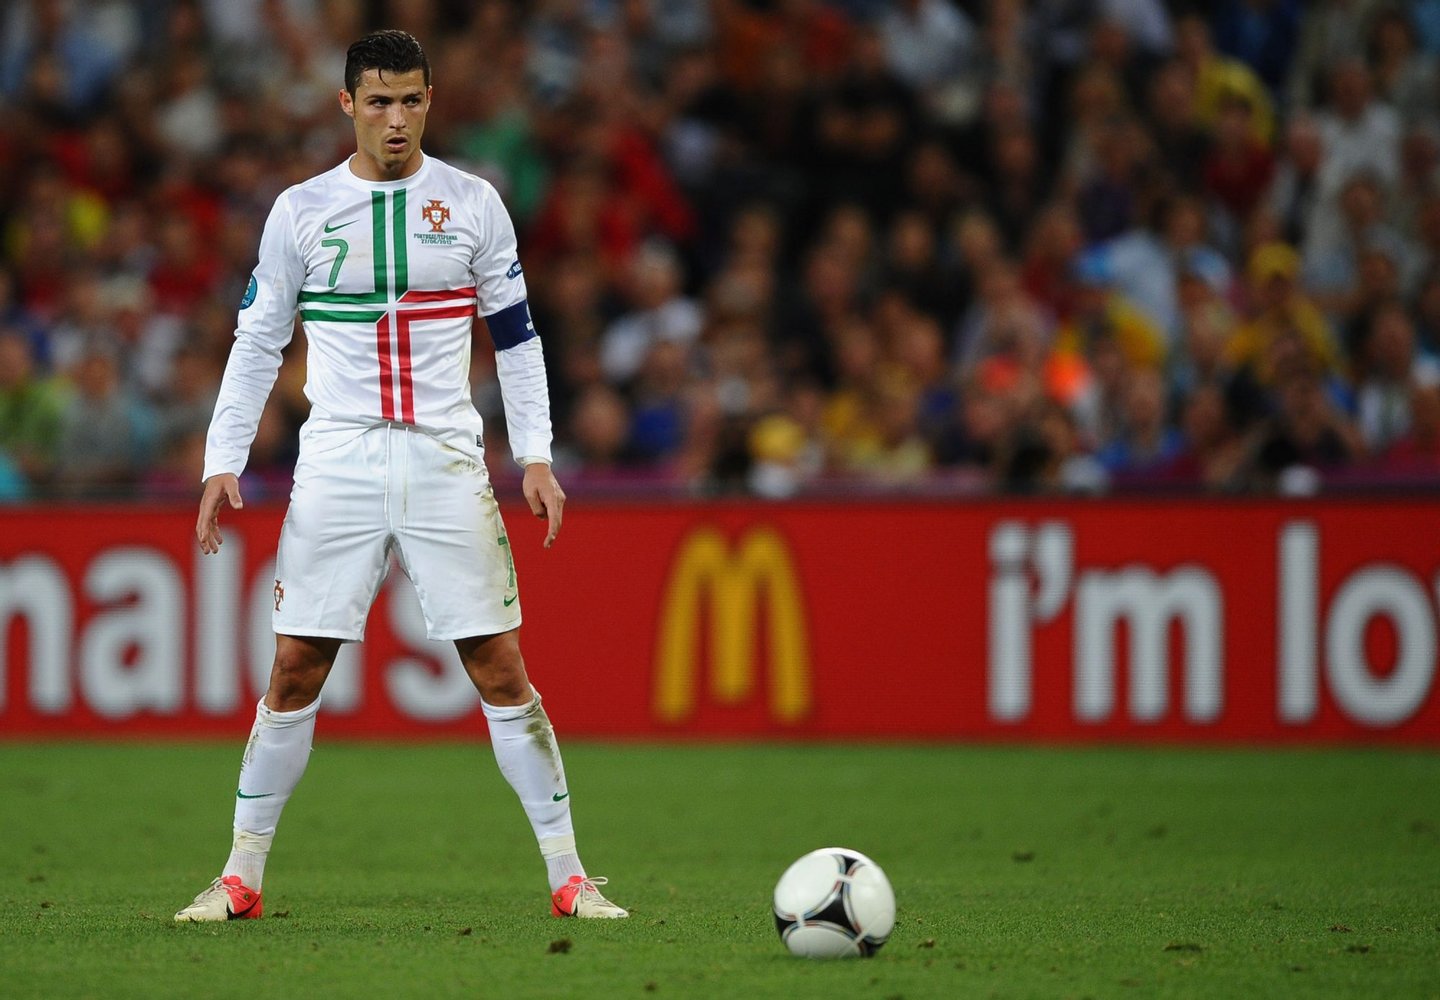 DONETSK, UKRAINE - JUNE 27: Cristiano Ronaldo of Portugal prepares to take a free kick during the UEFA EURO 2012 semi final match between Portugal and Spain at Donbass Arena on June 27, 2012 in Donetsk, Ukraine. (Photo by Laurence Griffiths/Getty Images)